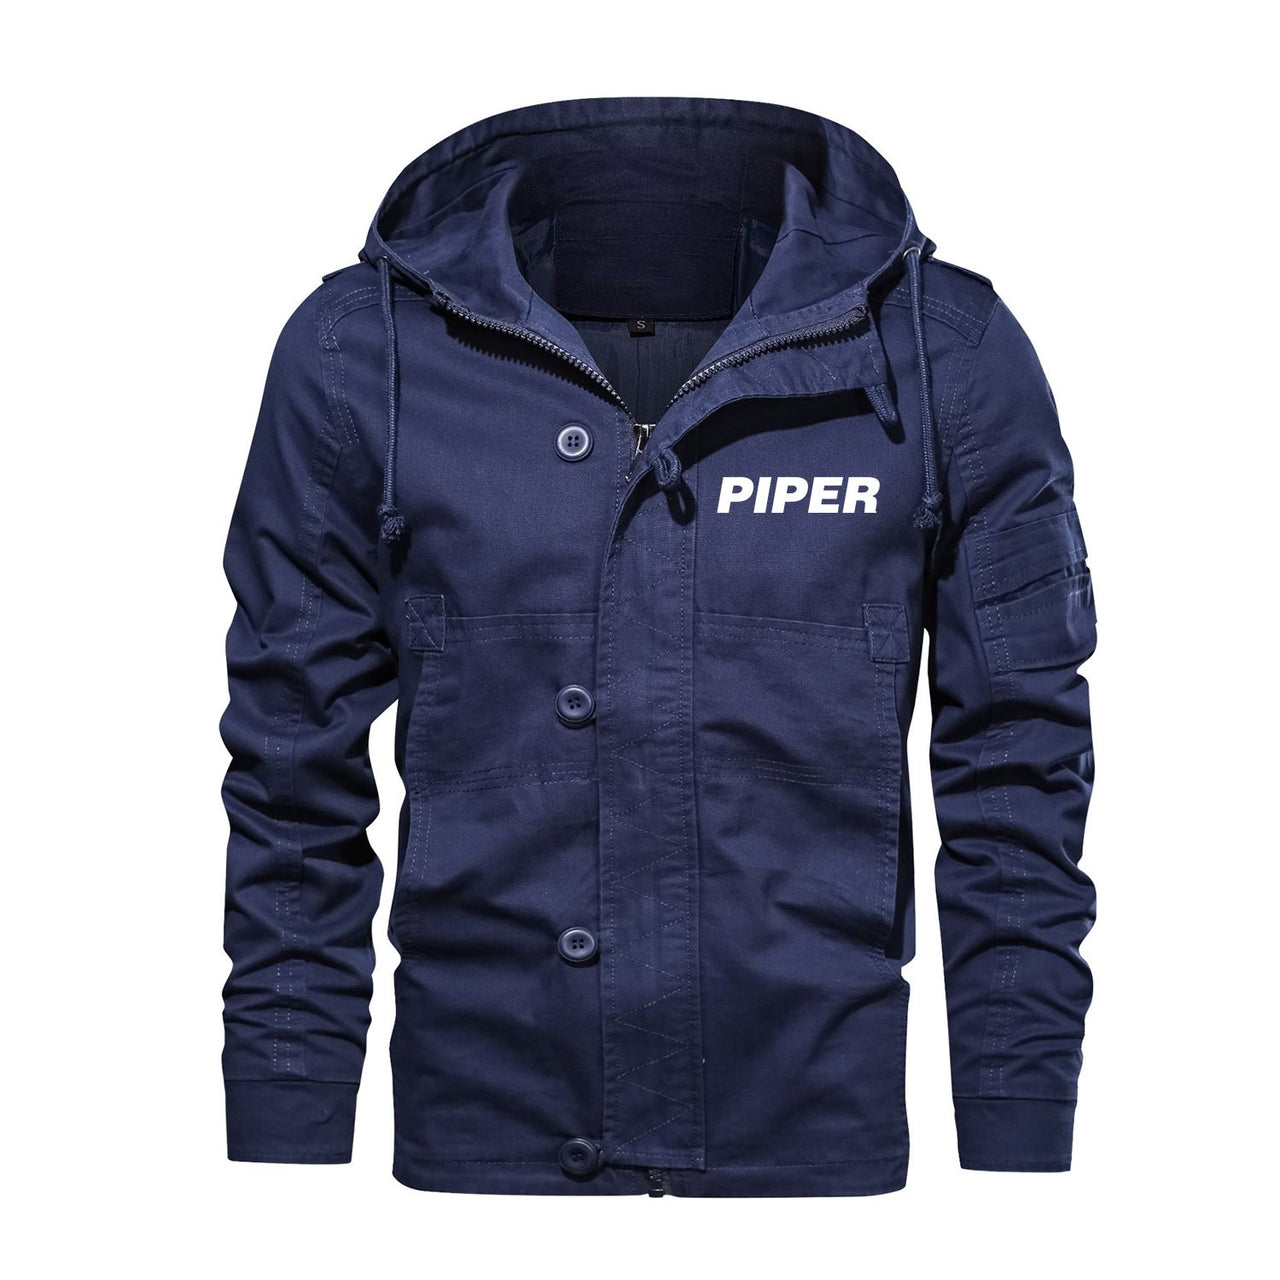 Piper & Text Designed Cotton Jackets